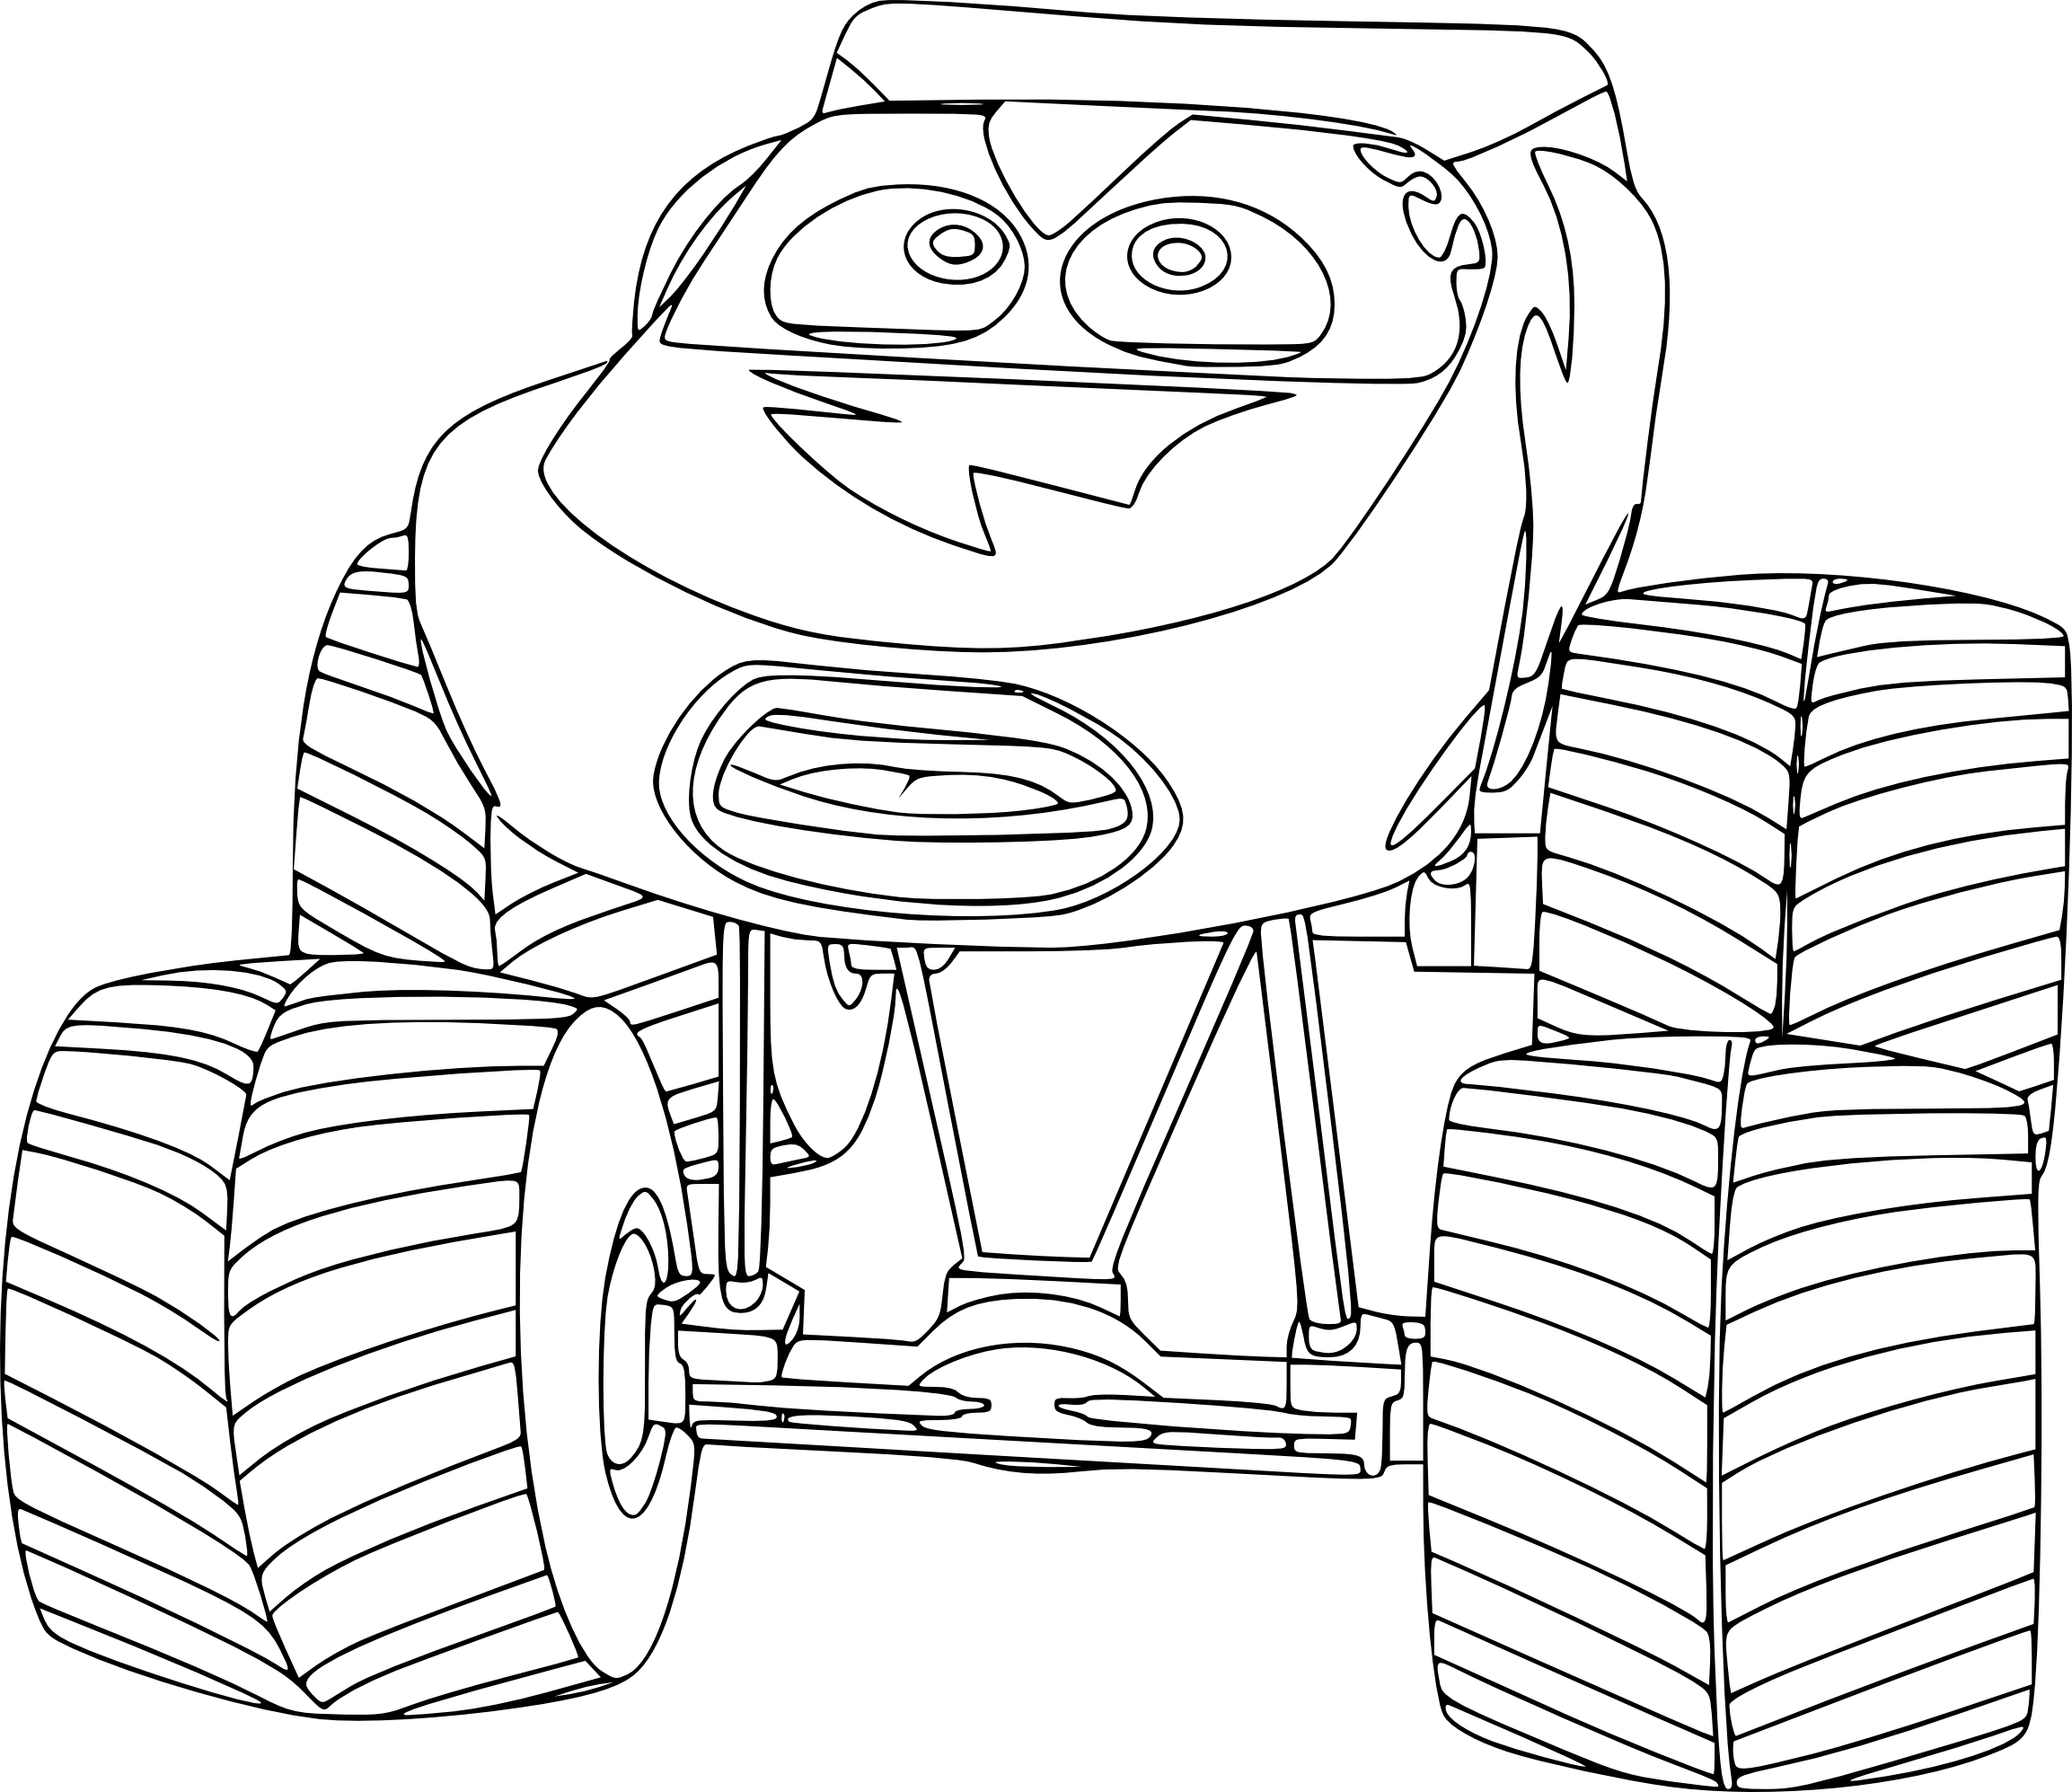 Coloriage Cars Monster Truck A Imprimer